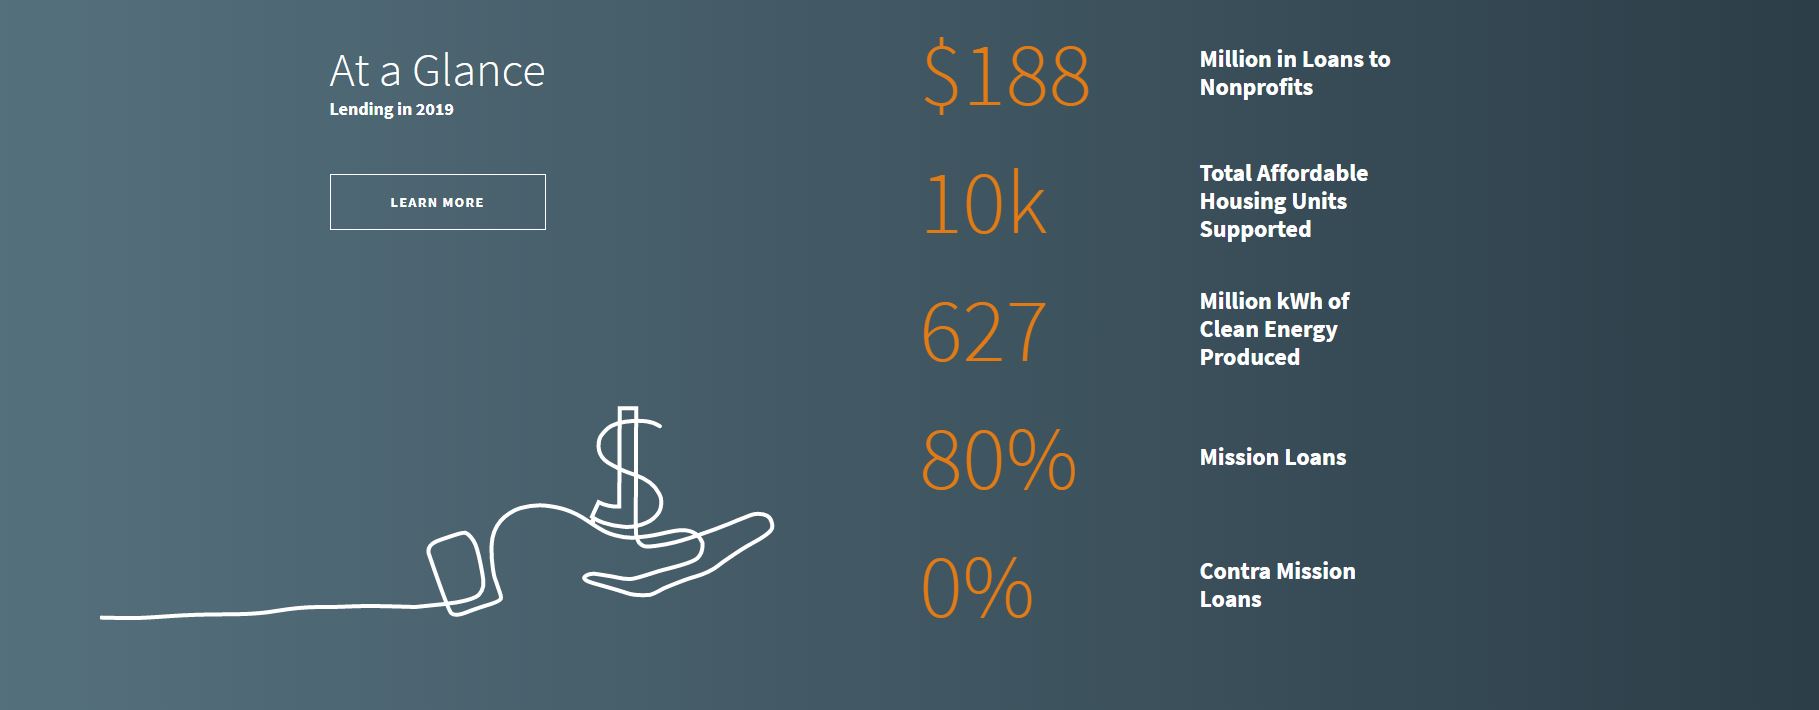 An image from Beneficial State Foundation Impact website showing numbers and text